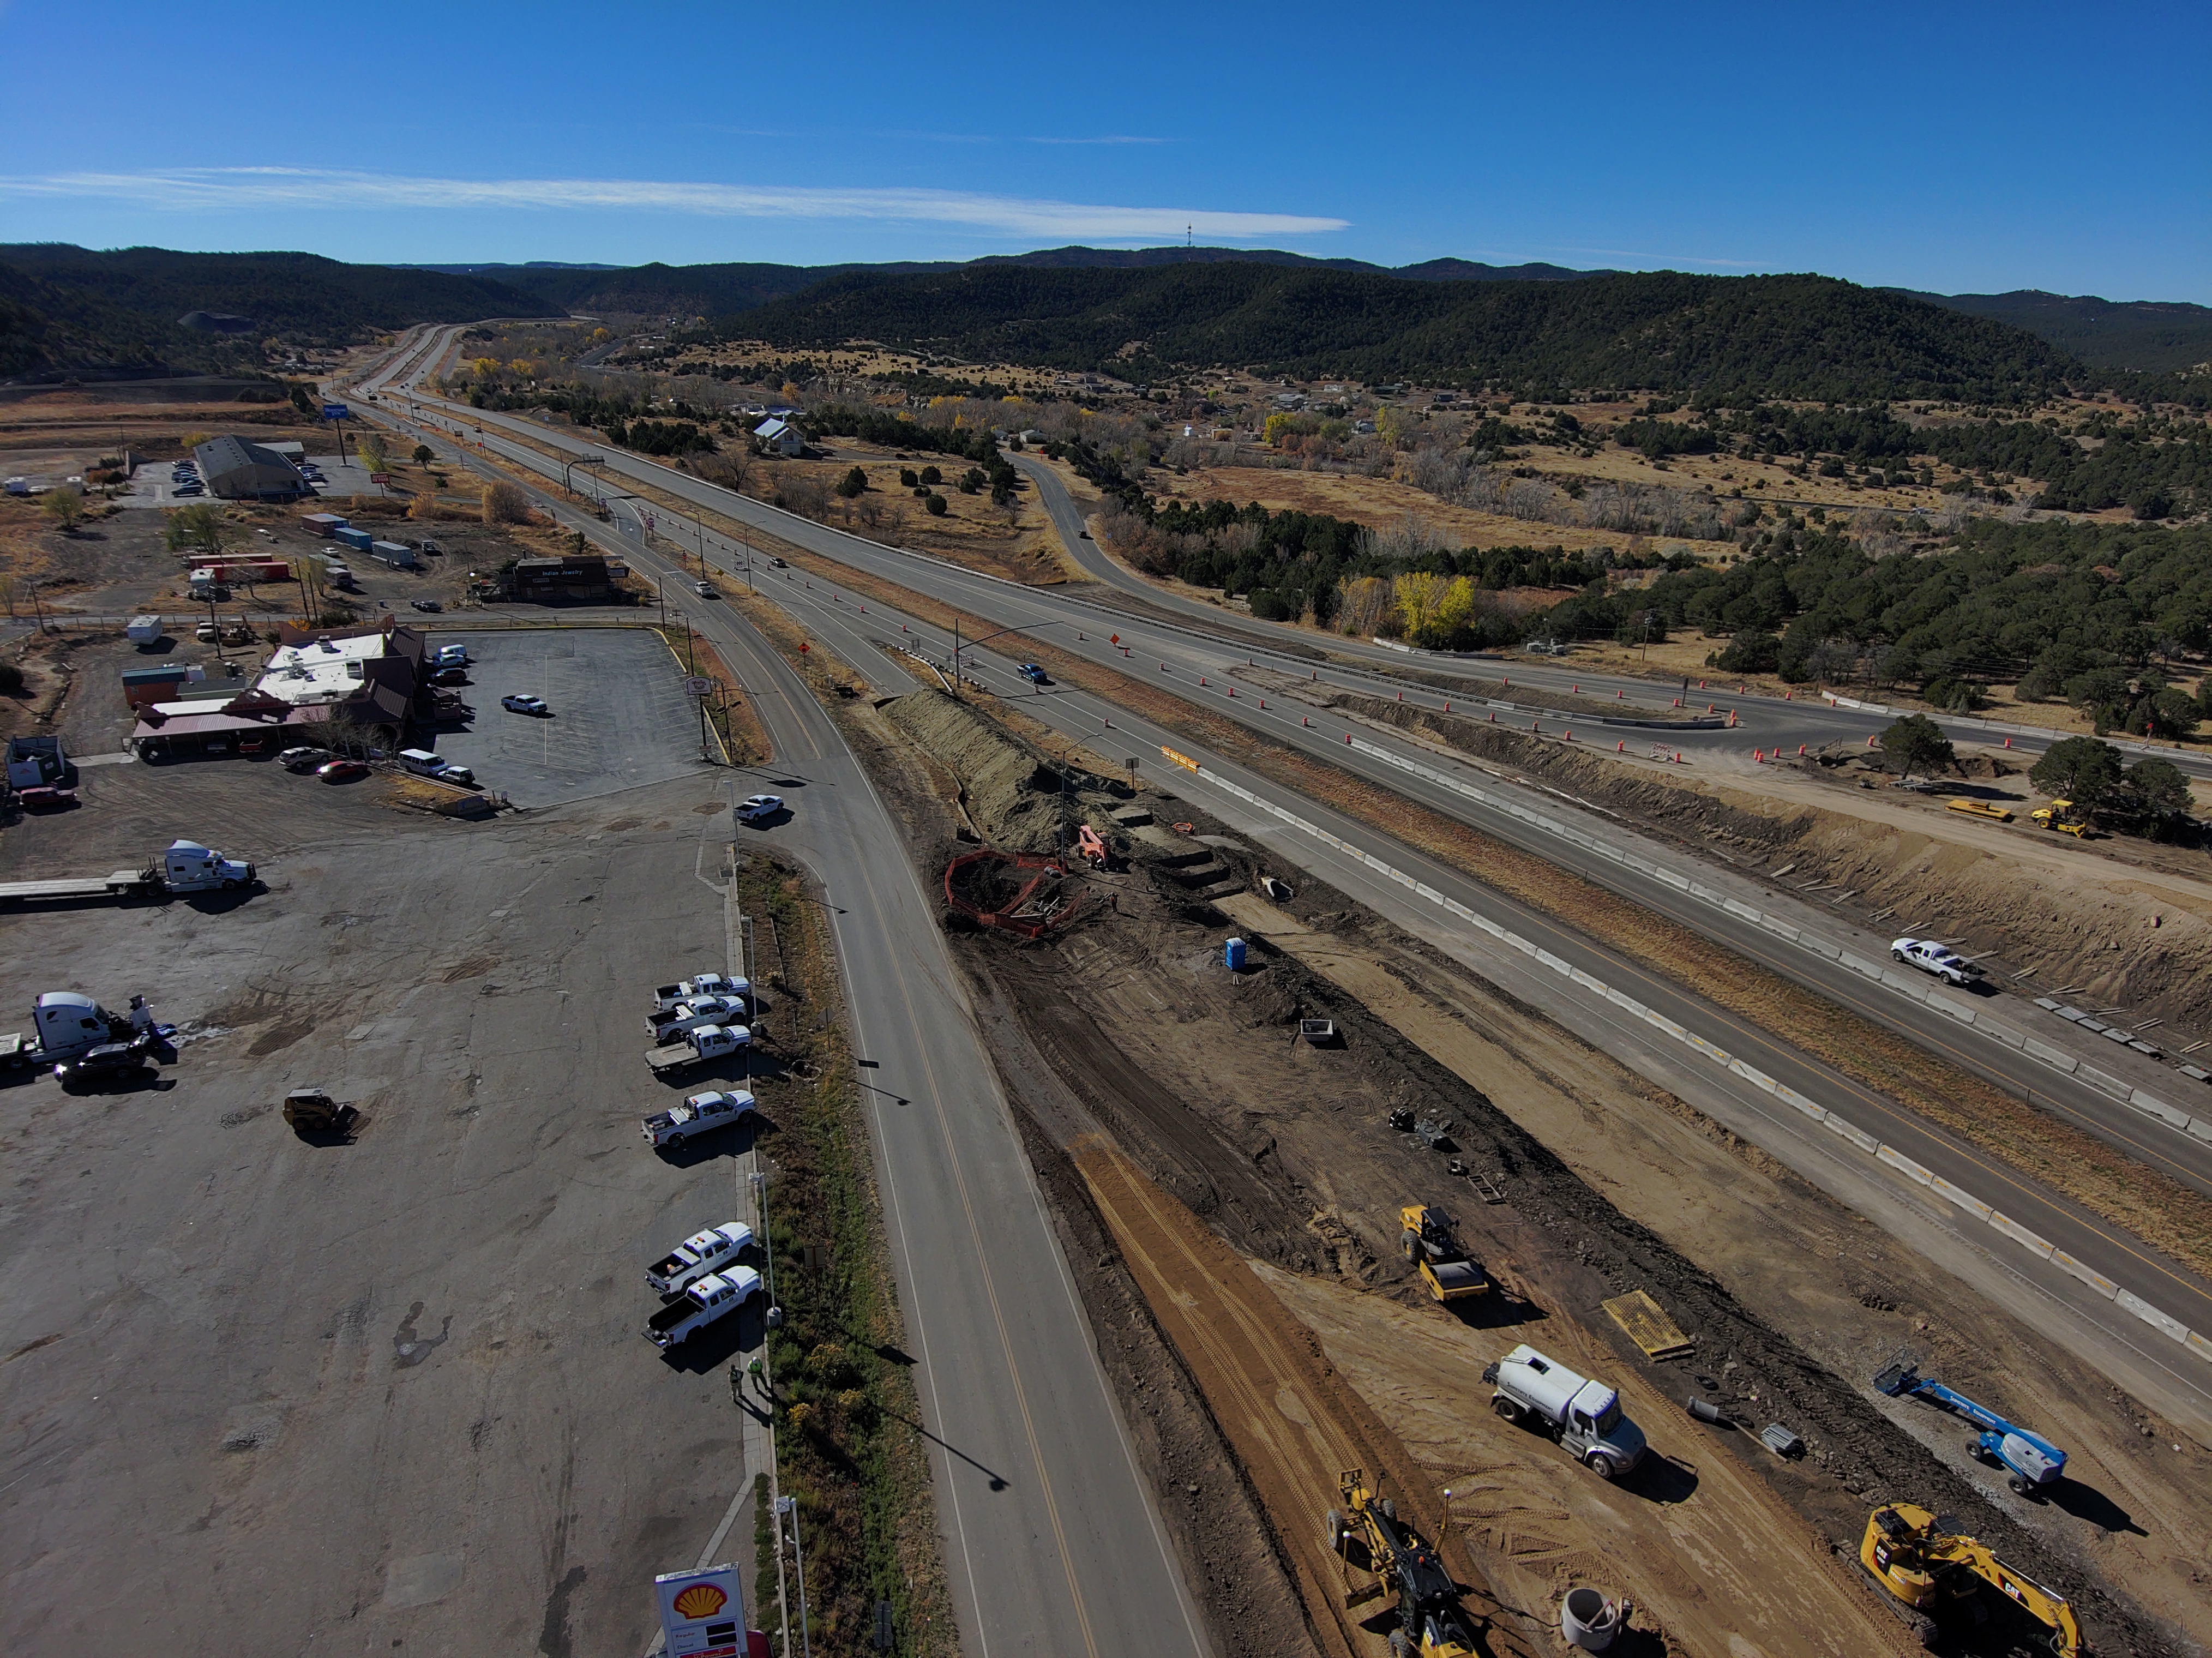 south drone view of detour configuration of on and off ramps EXIT 11.JPG detail image